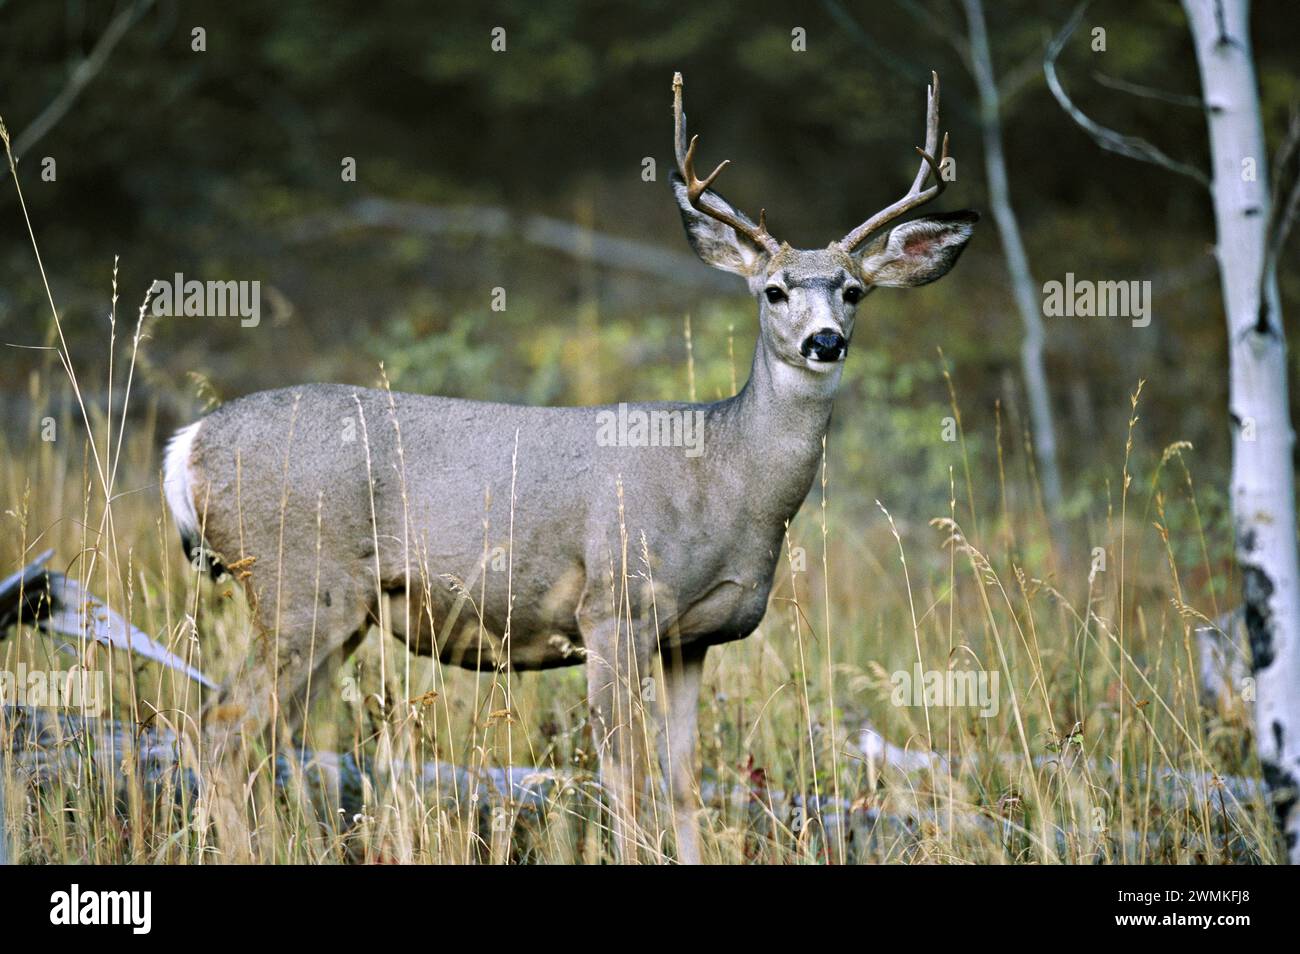 Large antlered white-tailed deer (Odocoileus virginianus) pauses at the edge of a forest, moving away from the threat of an approaching wild fire Stock Photo